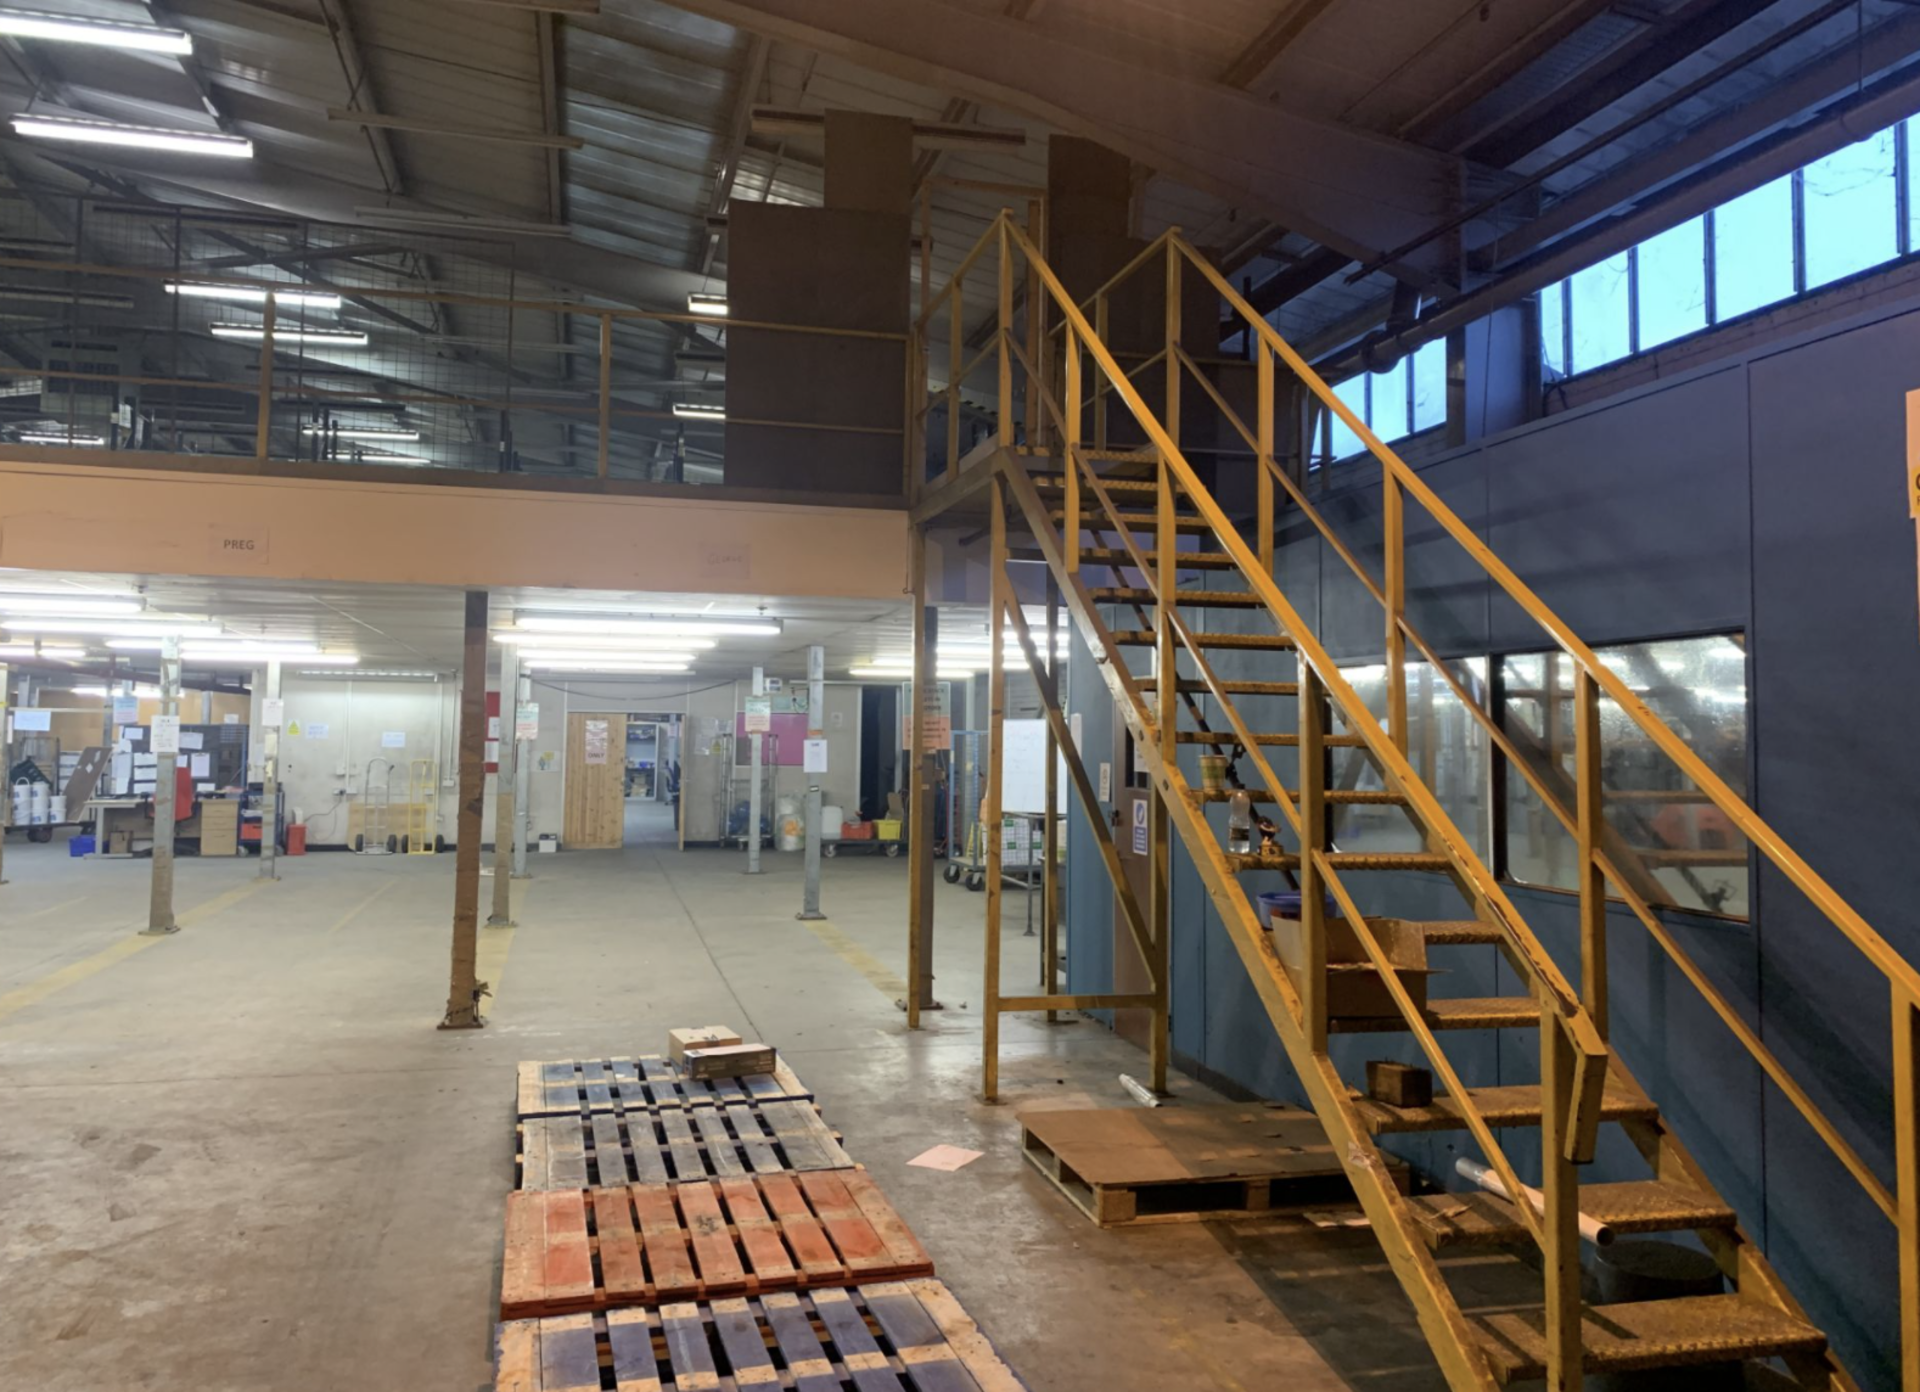 £500,000 MEZZANINE FLOOR 80m x 28m 3 stairs and loading bay inc - Image 16 of 21